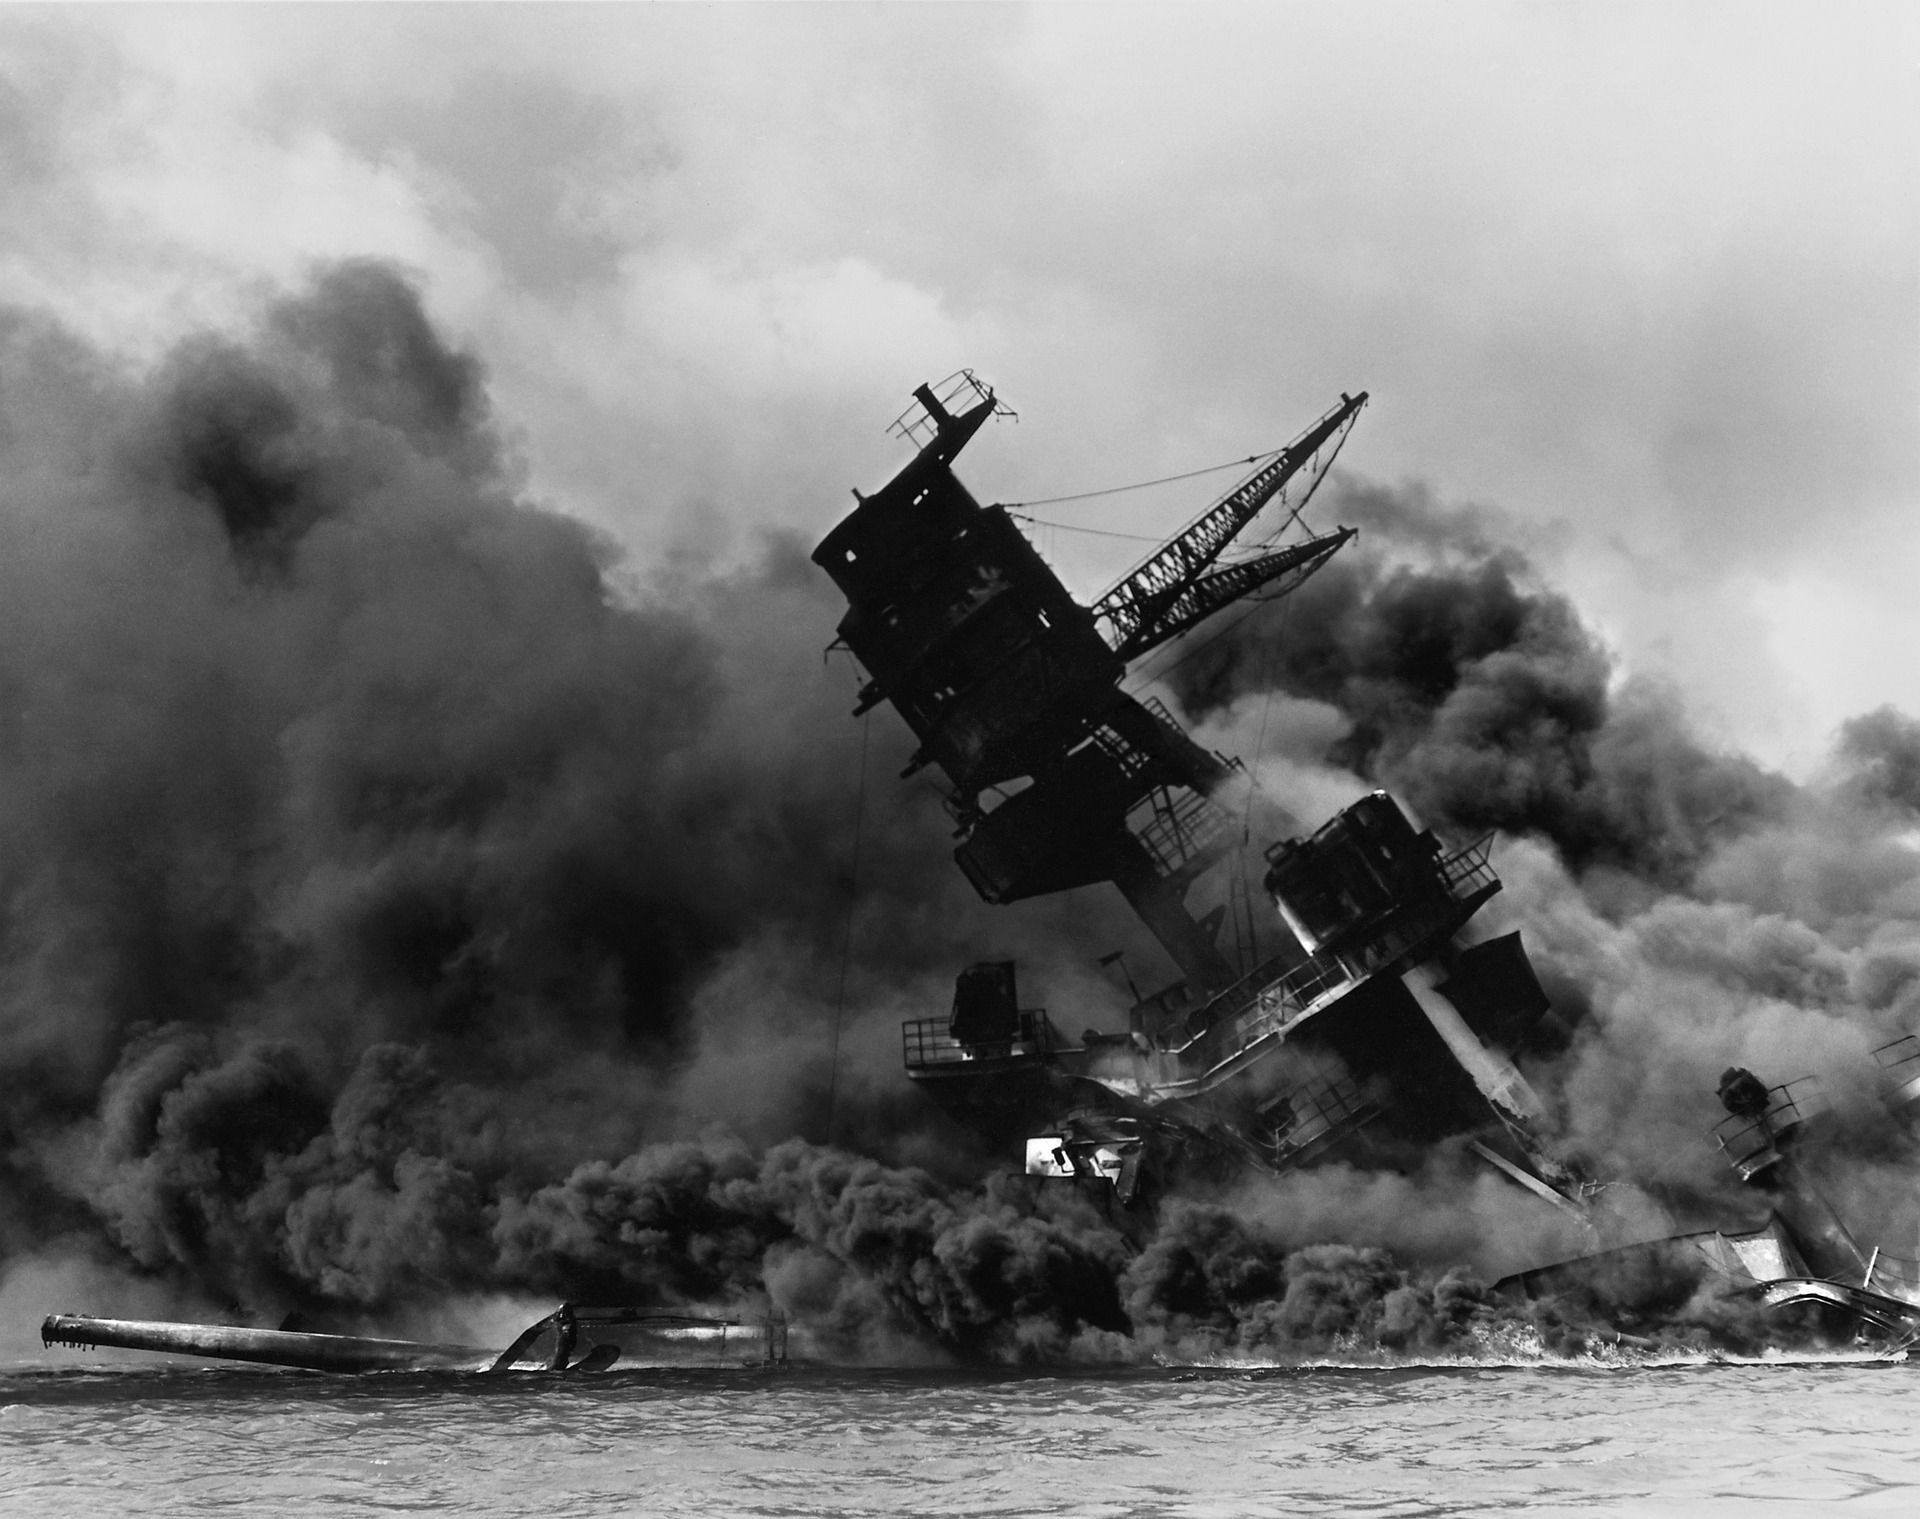 Why is Pearl Harbor Remembrance Day commemorated?